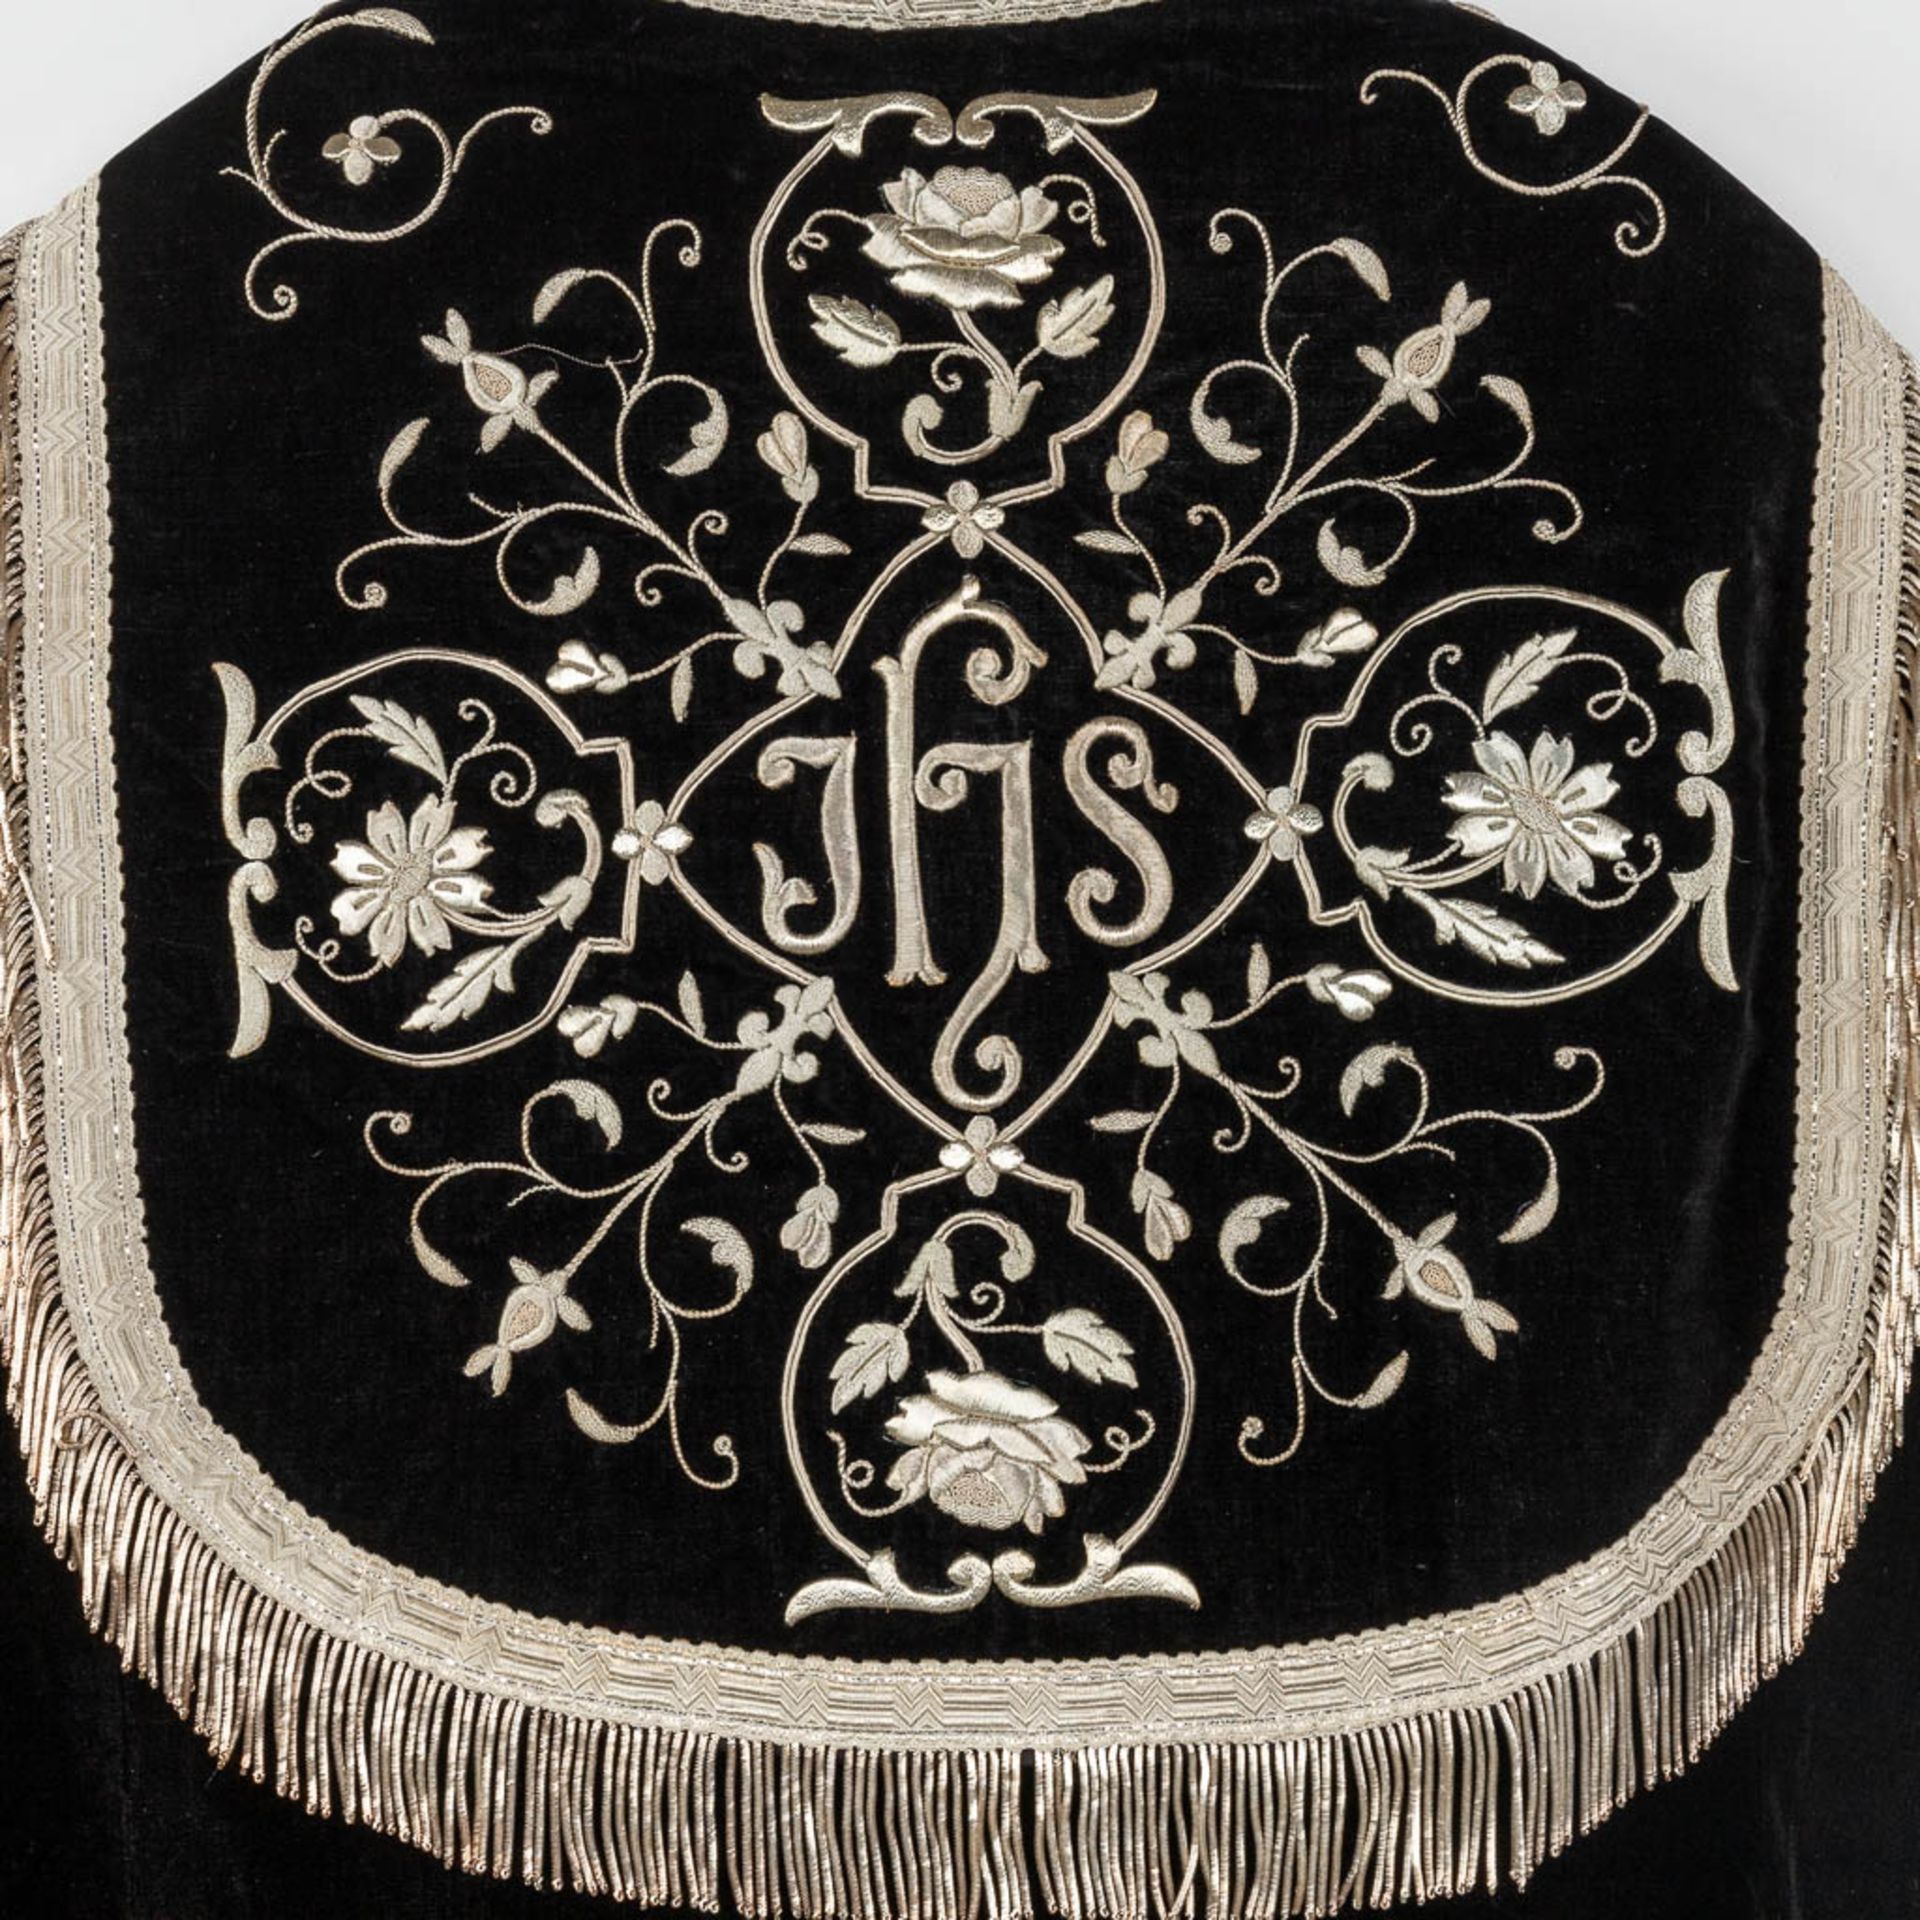 A Cope, Roman Chasuble, Stola, Brusa and Chalice Veil, Decorated with the IHS logo - Image 4 of 14